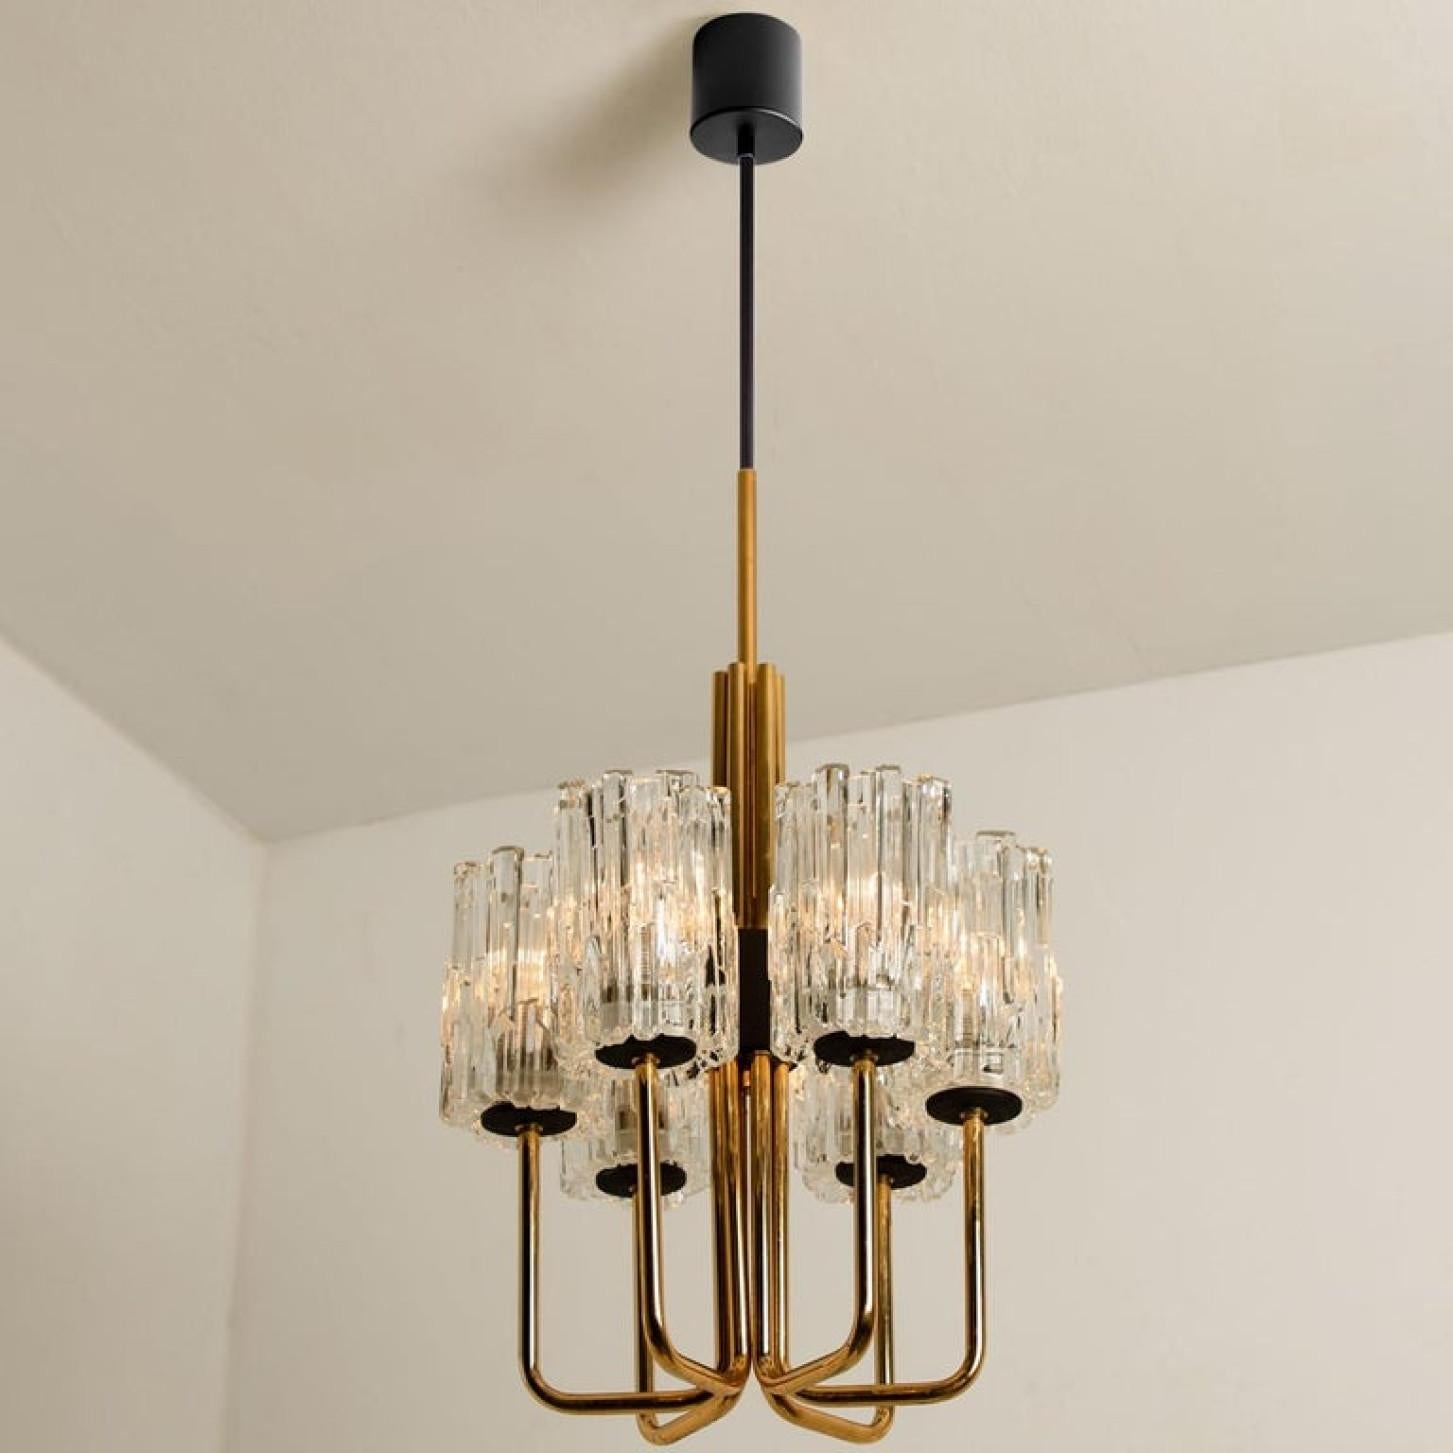 Midcentury Brass and Blown Glass Chandelier by Hillebrand, 1960s For Sale 8